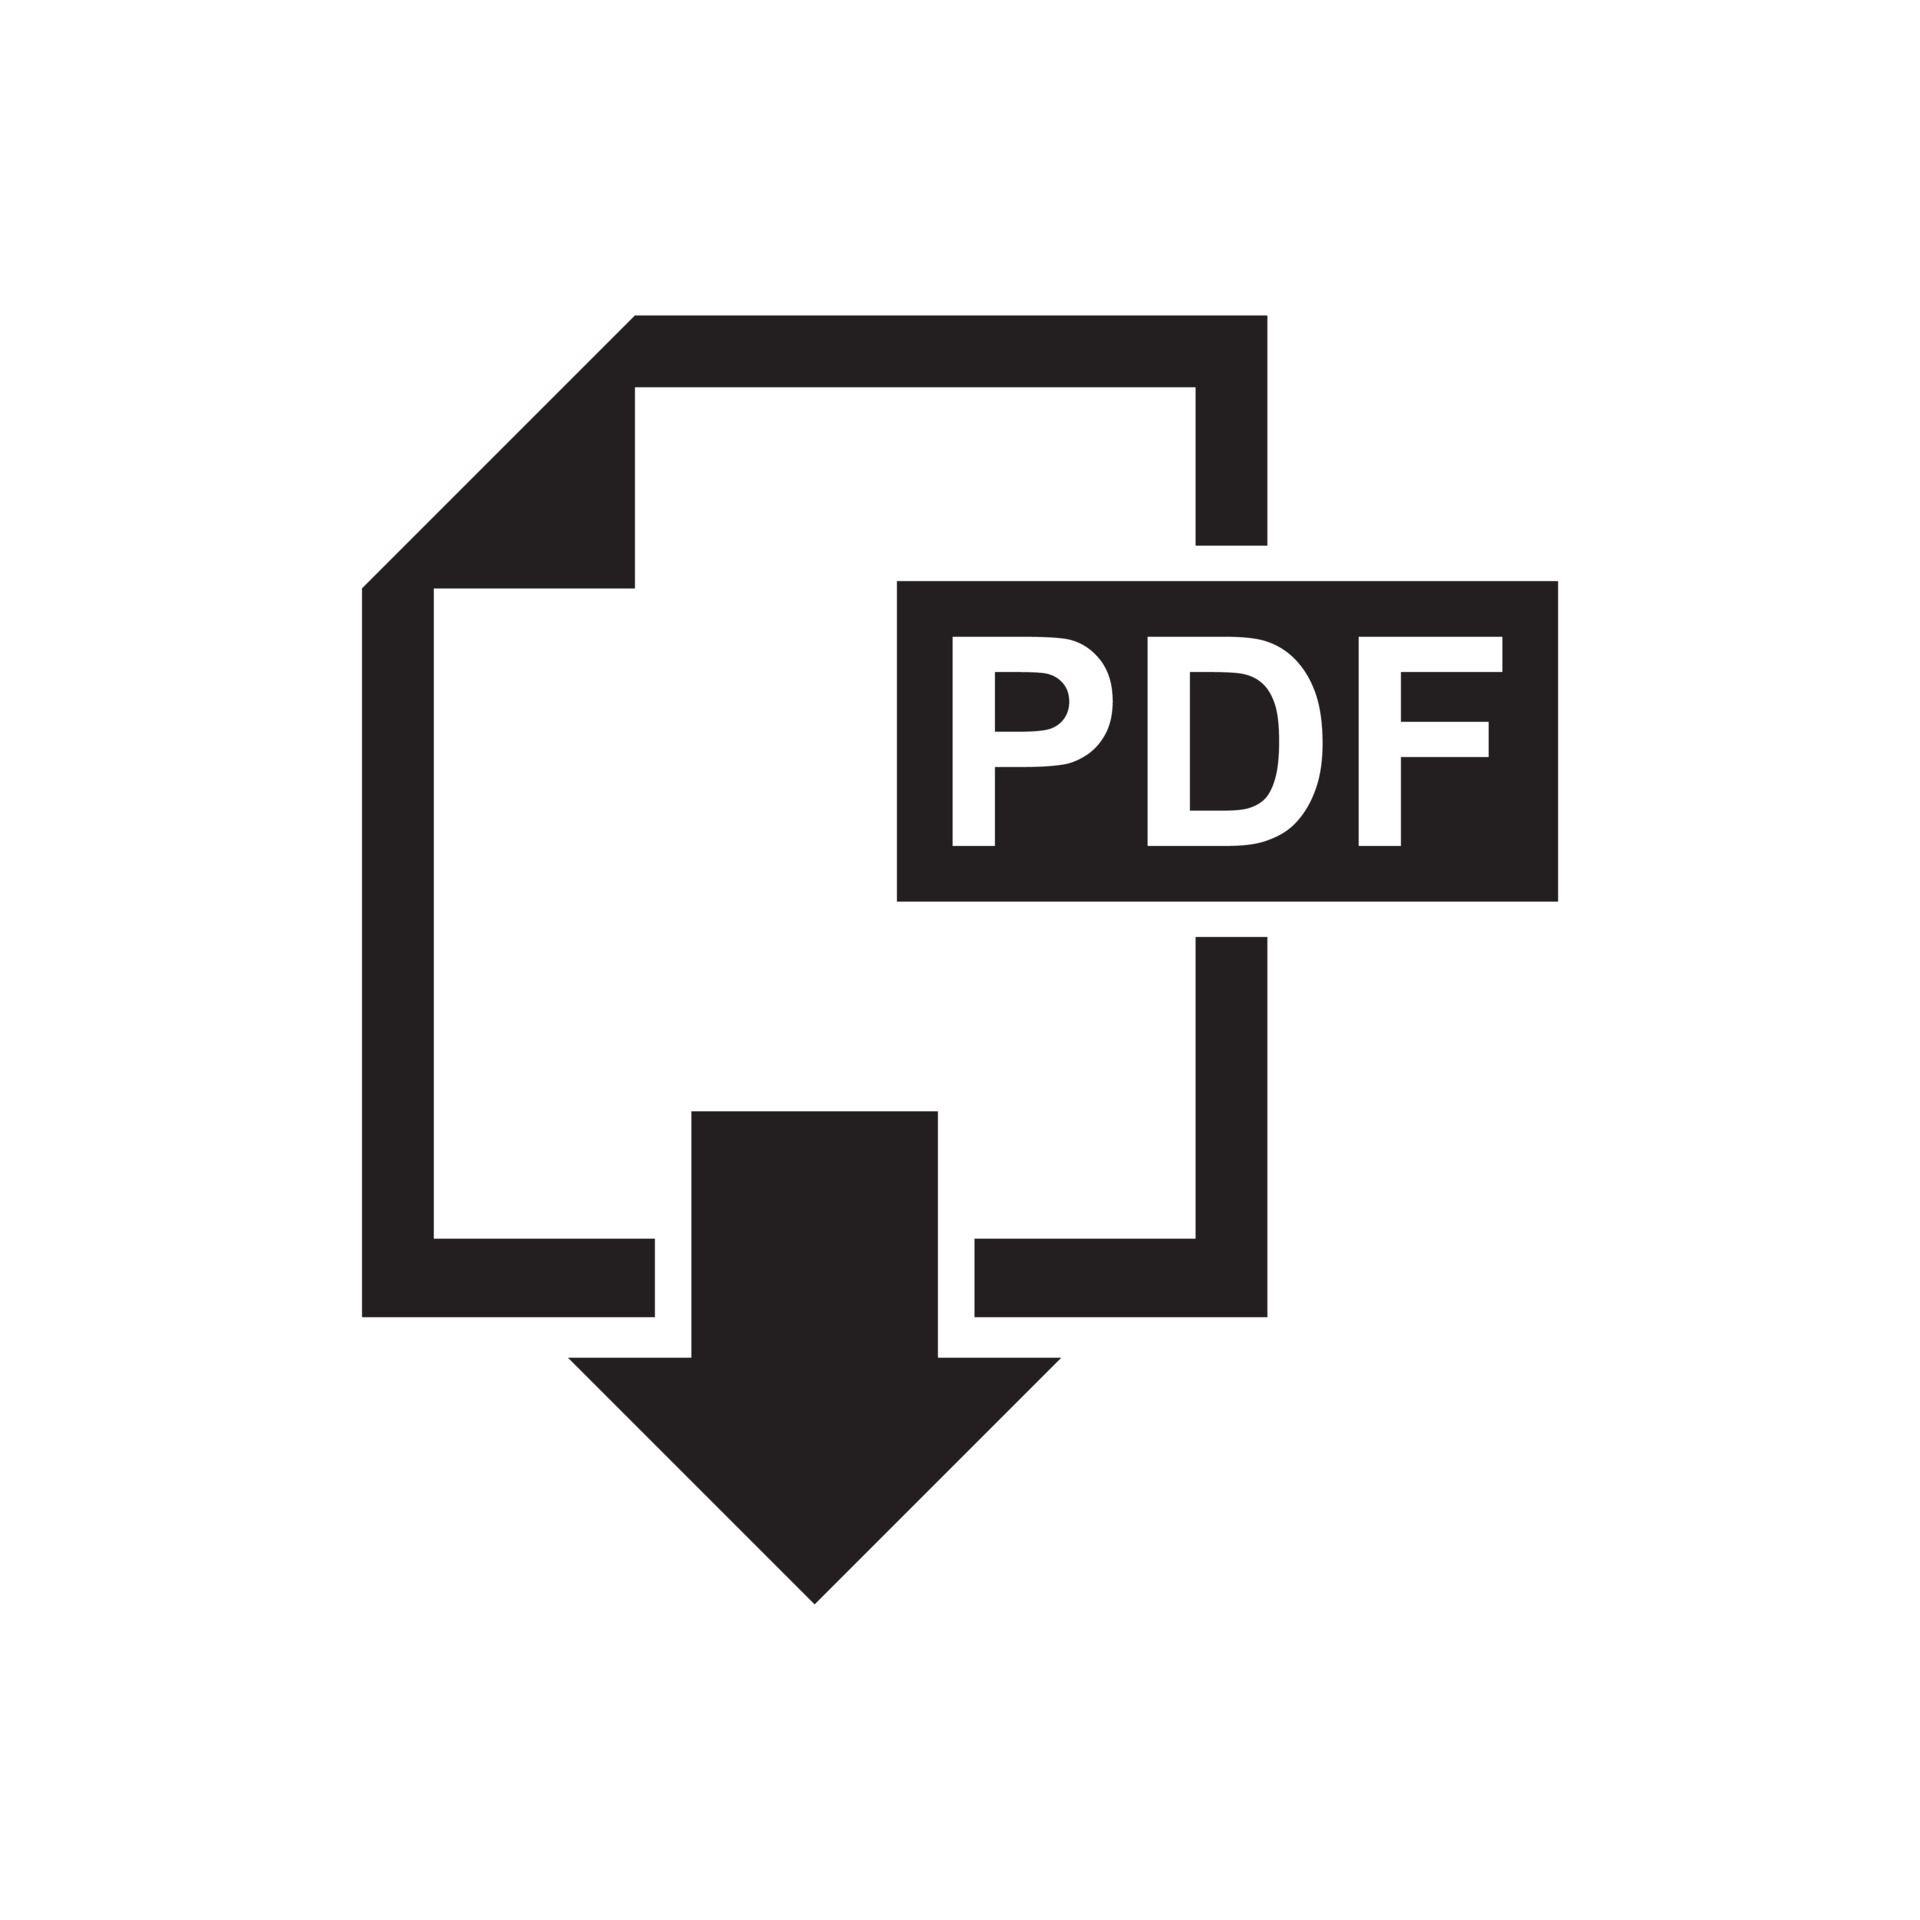 Download pdf icon template black color editable. Download Pdf icon symbol  Flat vector sign isolated on white background. Simple logo vector  illustration for graphic and web design. Free Vector